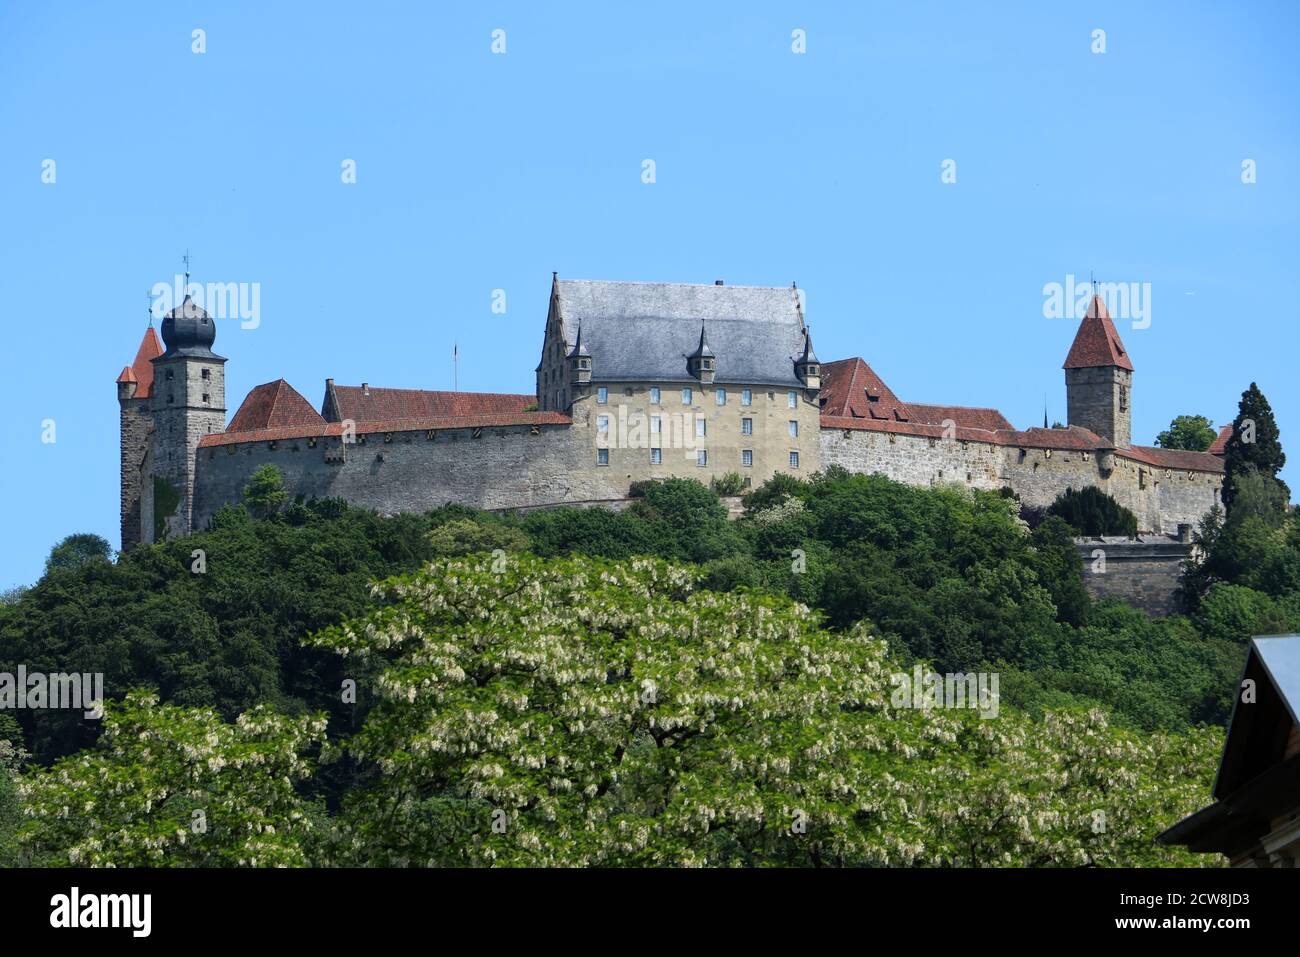 castle of Coburg Germany in summer Stock Photo